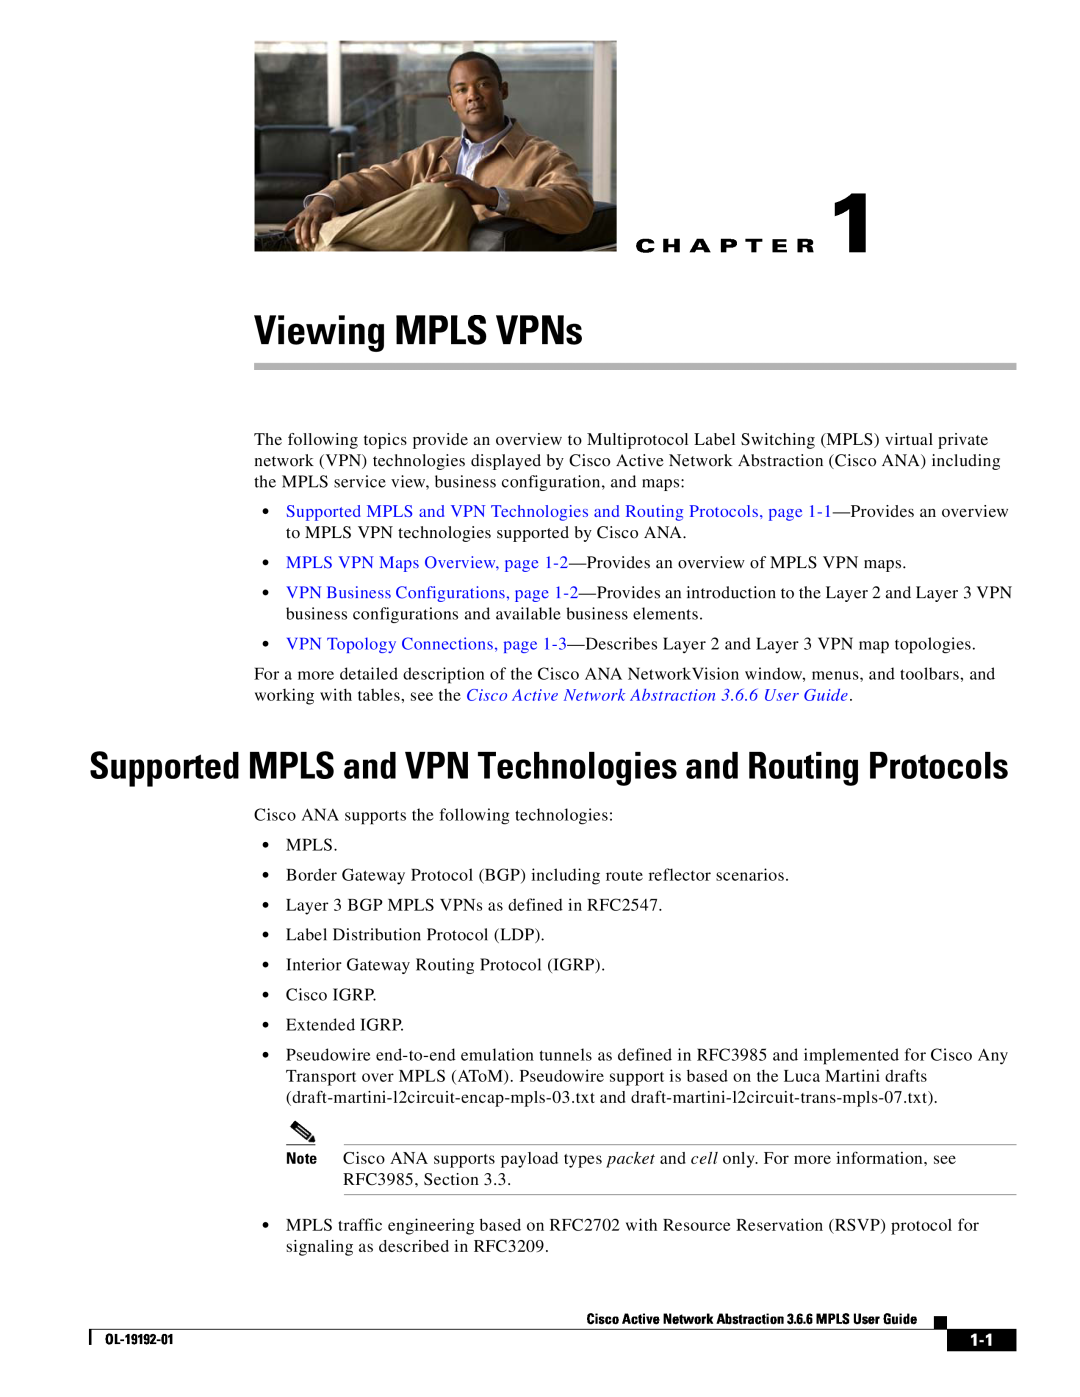 Cisco Systems 3.6.6 manual Viewing MPLS VPNs, C H A P T E R, Supported MPLS and VPN Technologies and Routing Protocols 